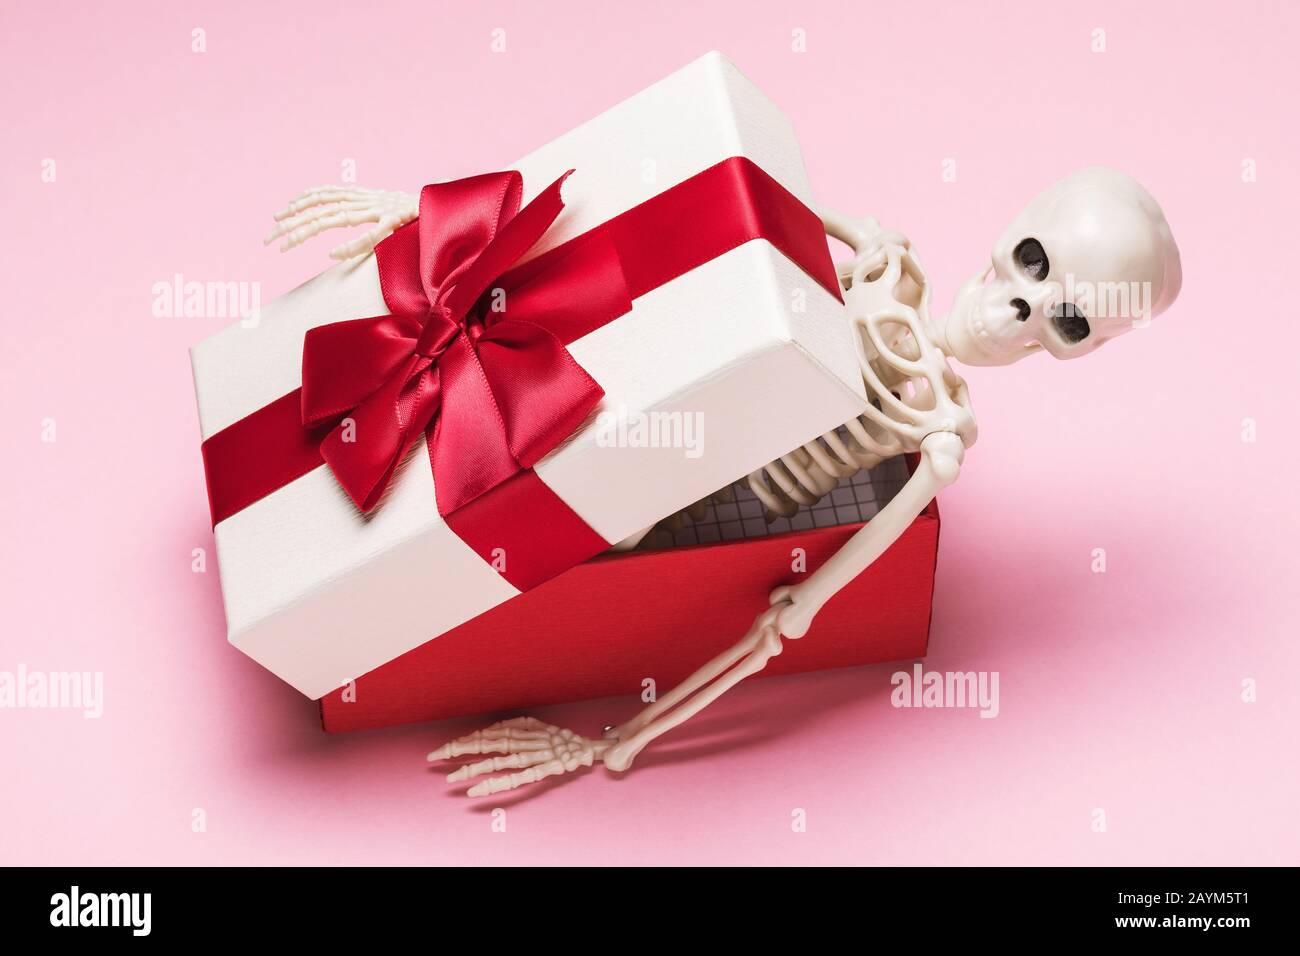 Human skeleton in a gift box on a pink background. Untimely gift concept Stock Photo